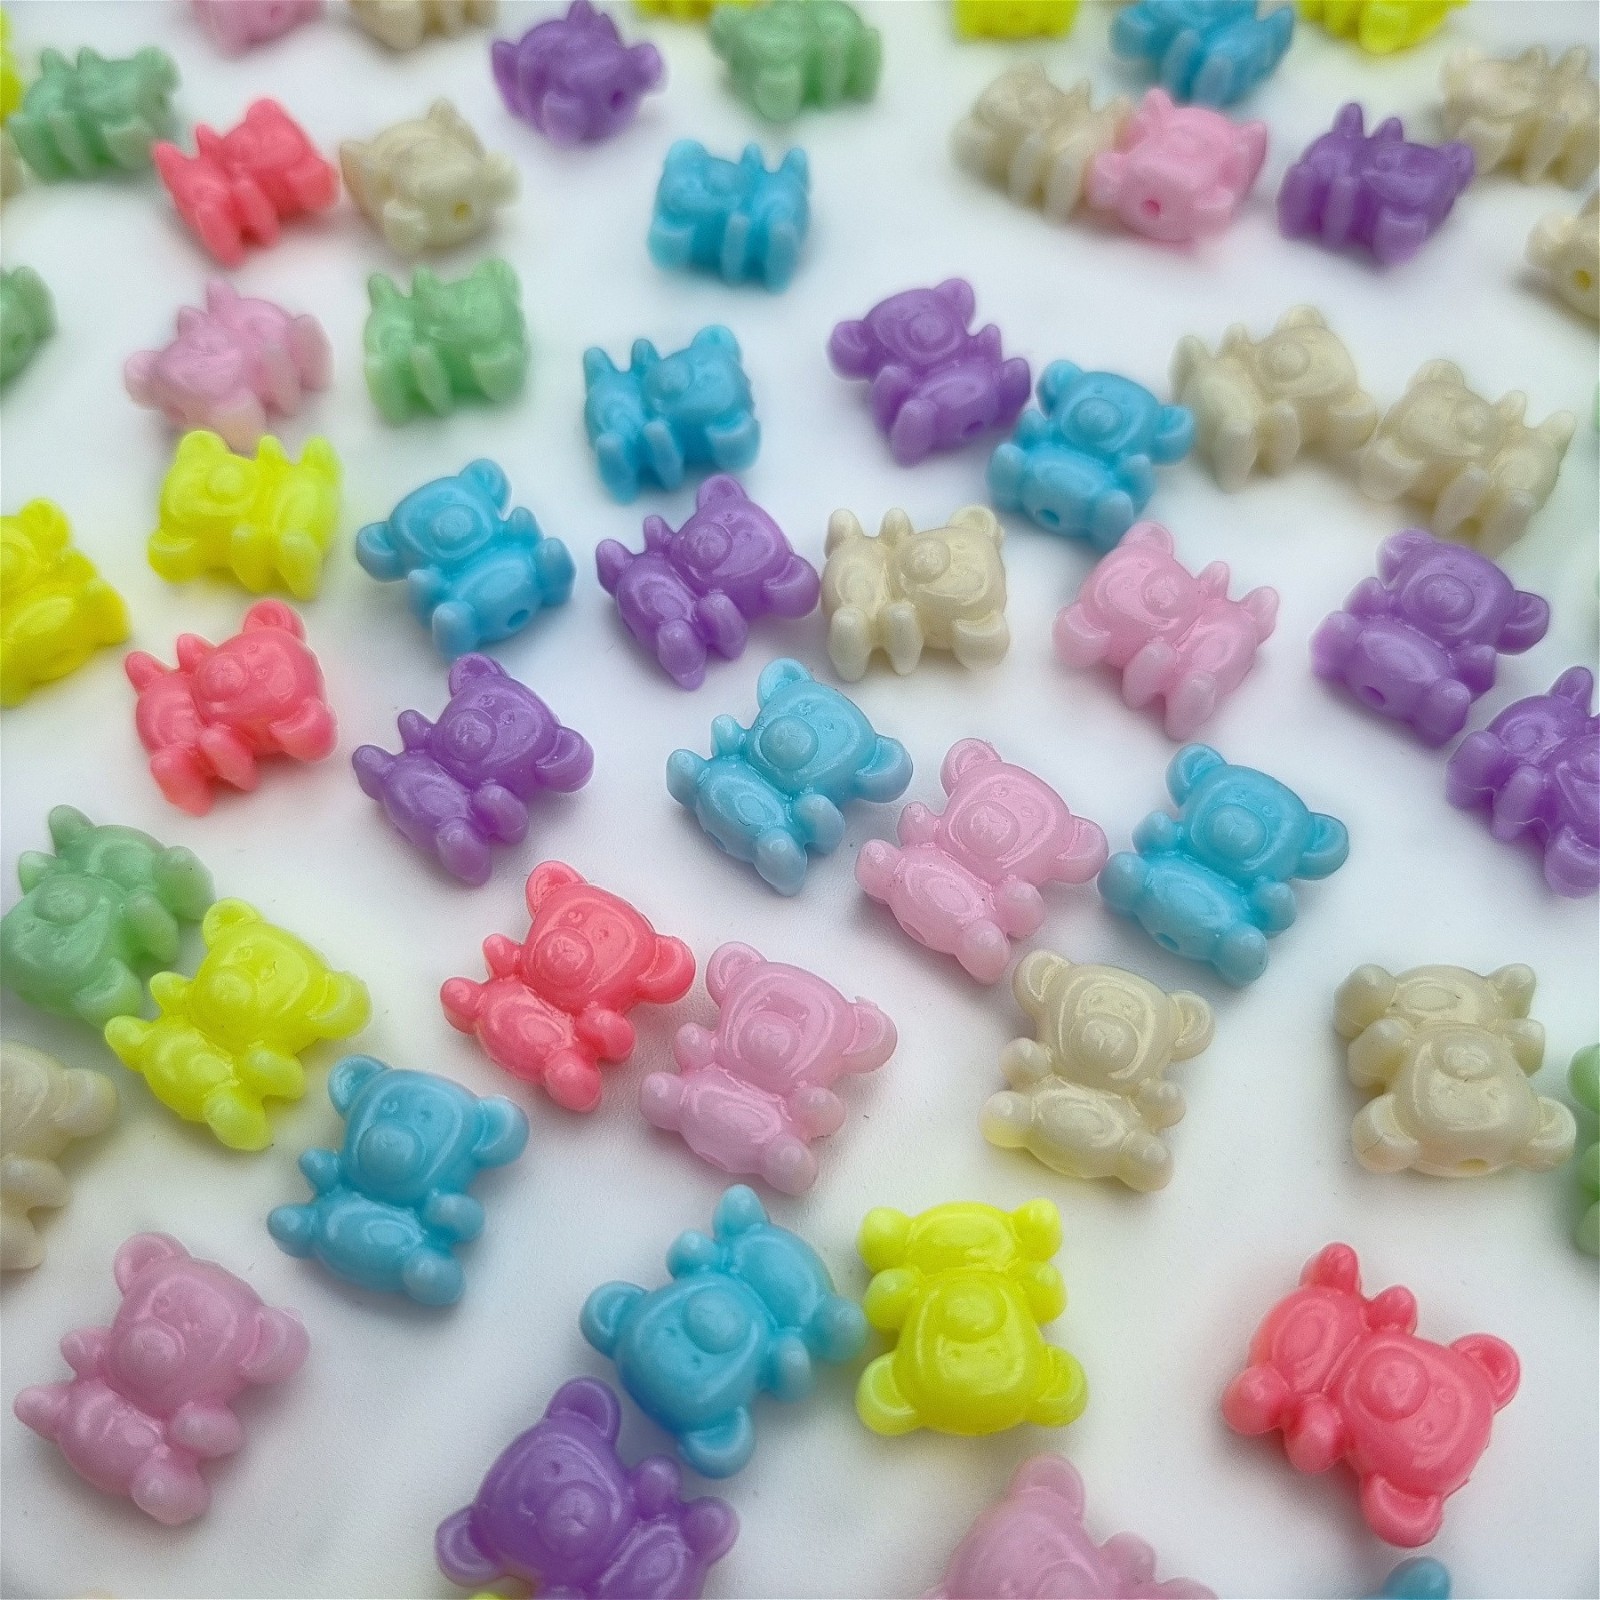 Acrylic beads / colored bears approx. 13x12mm / 30pcs. XYPLKSZ003